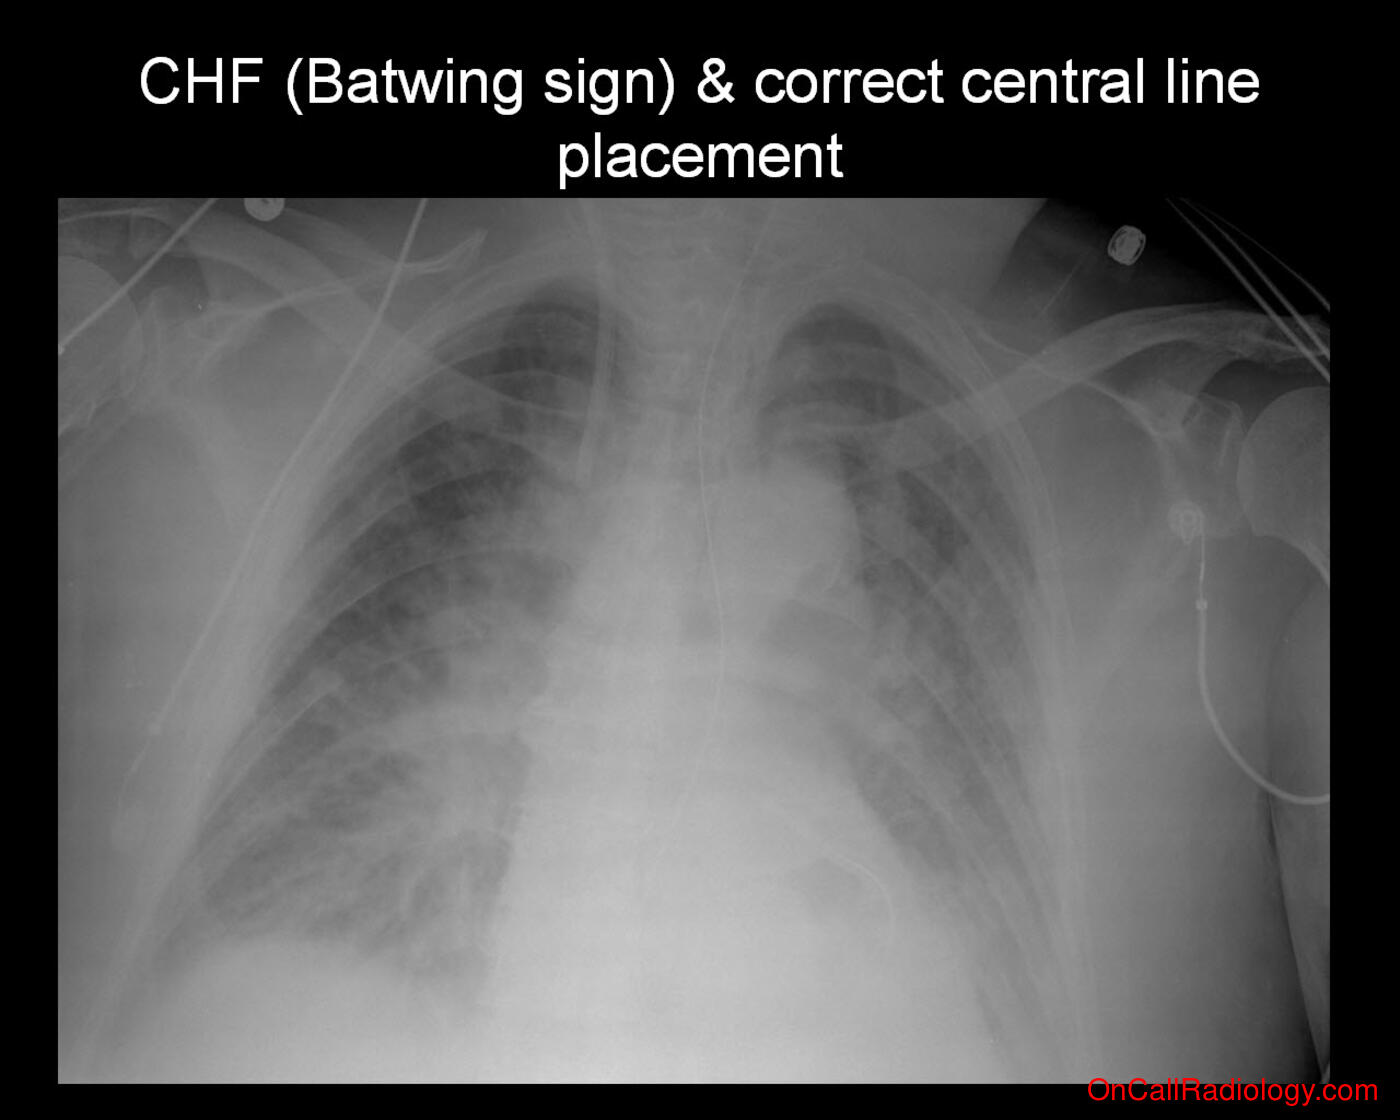 CHF (Severe CHF (Batwing sign) & correct central line placement - Plain film, Radiograph)